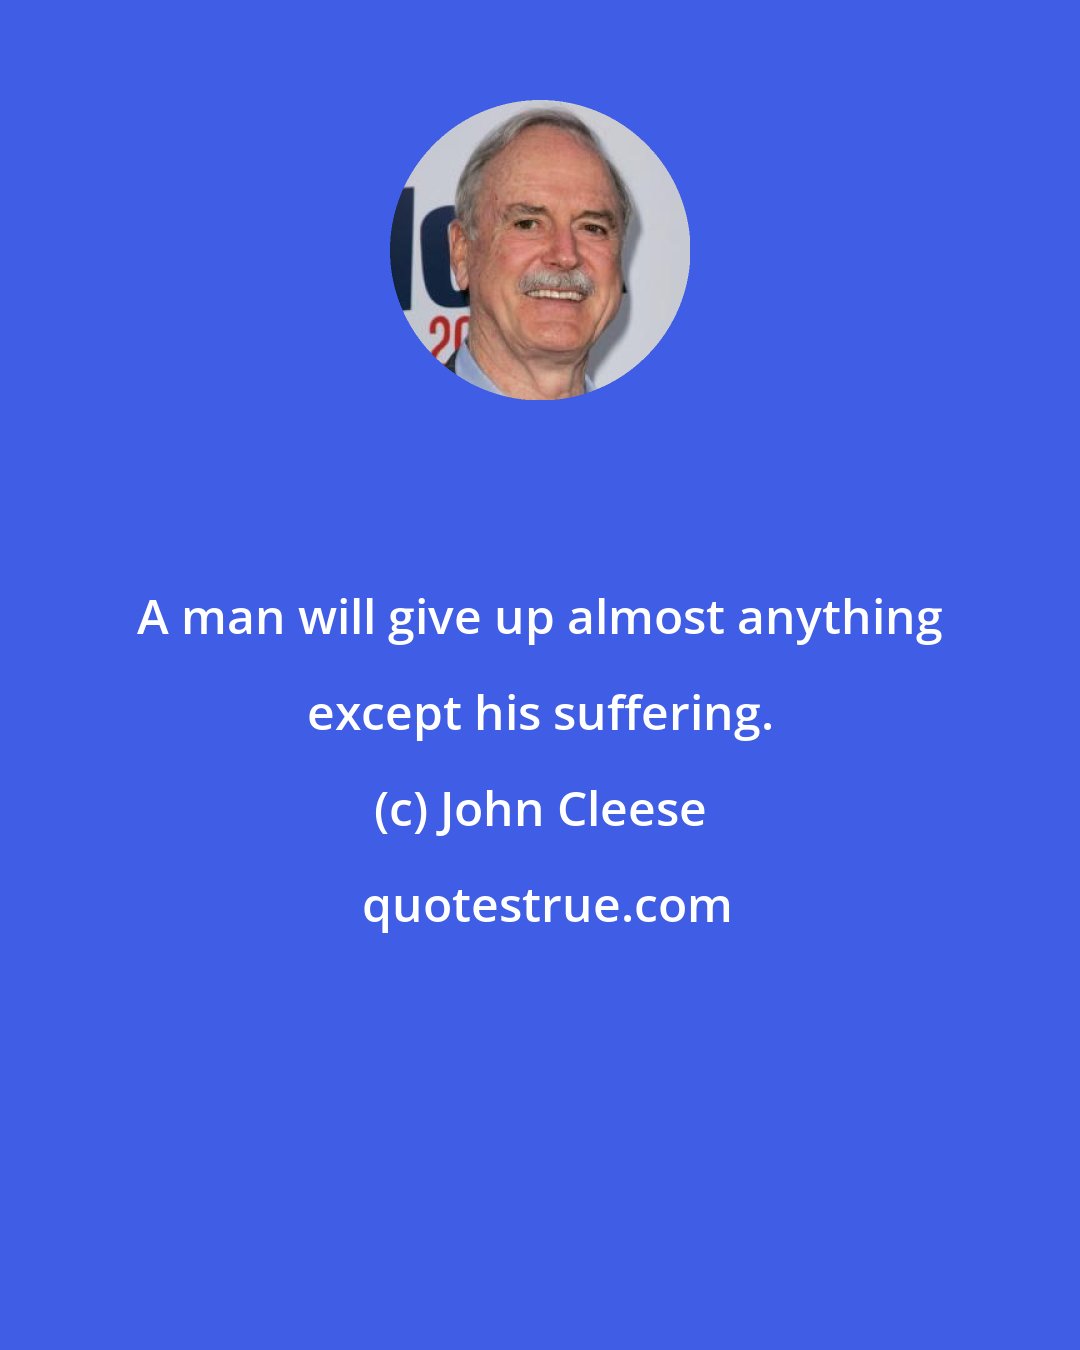 John Cleese: A man will give up almost anything except his suffering.